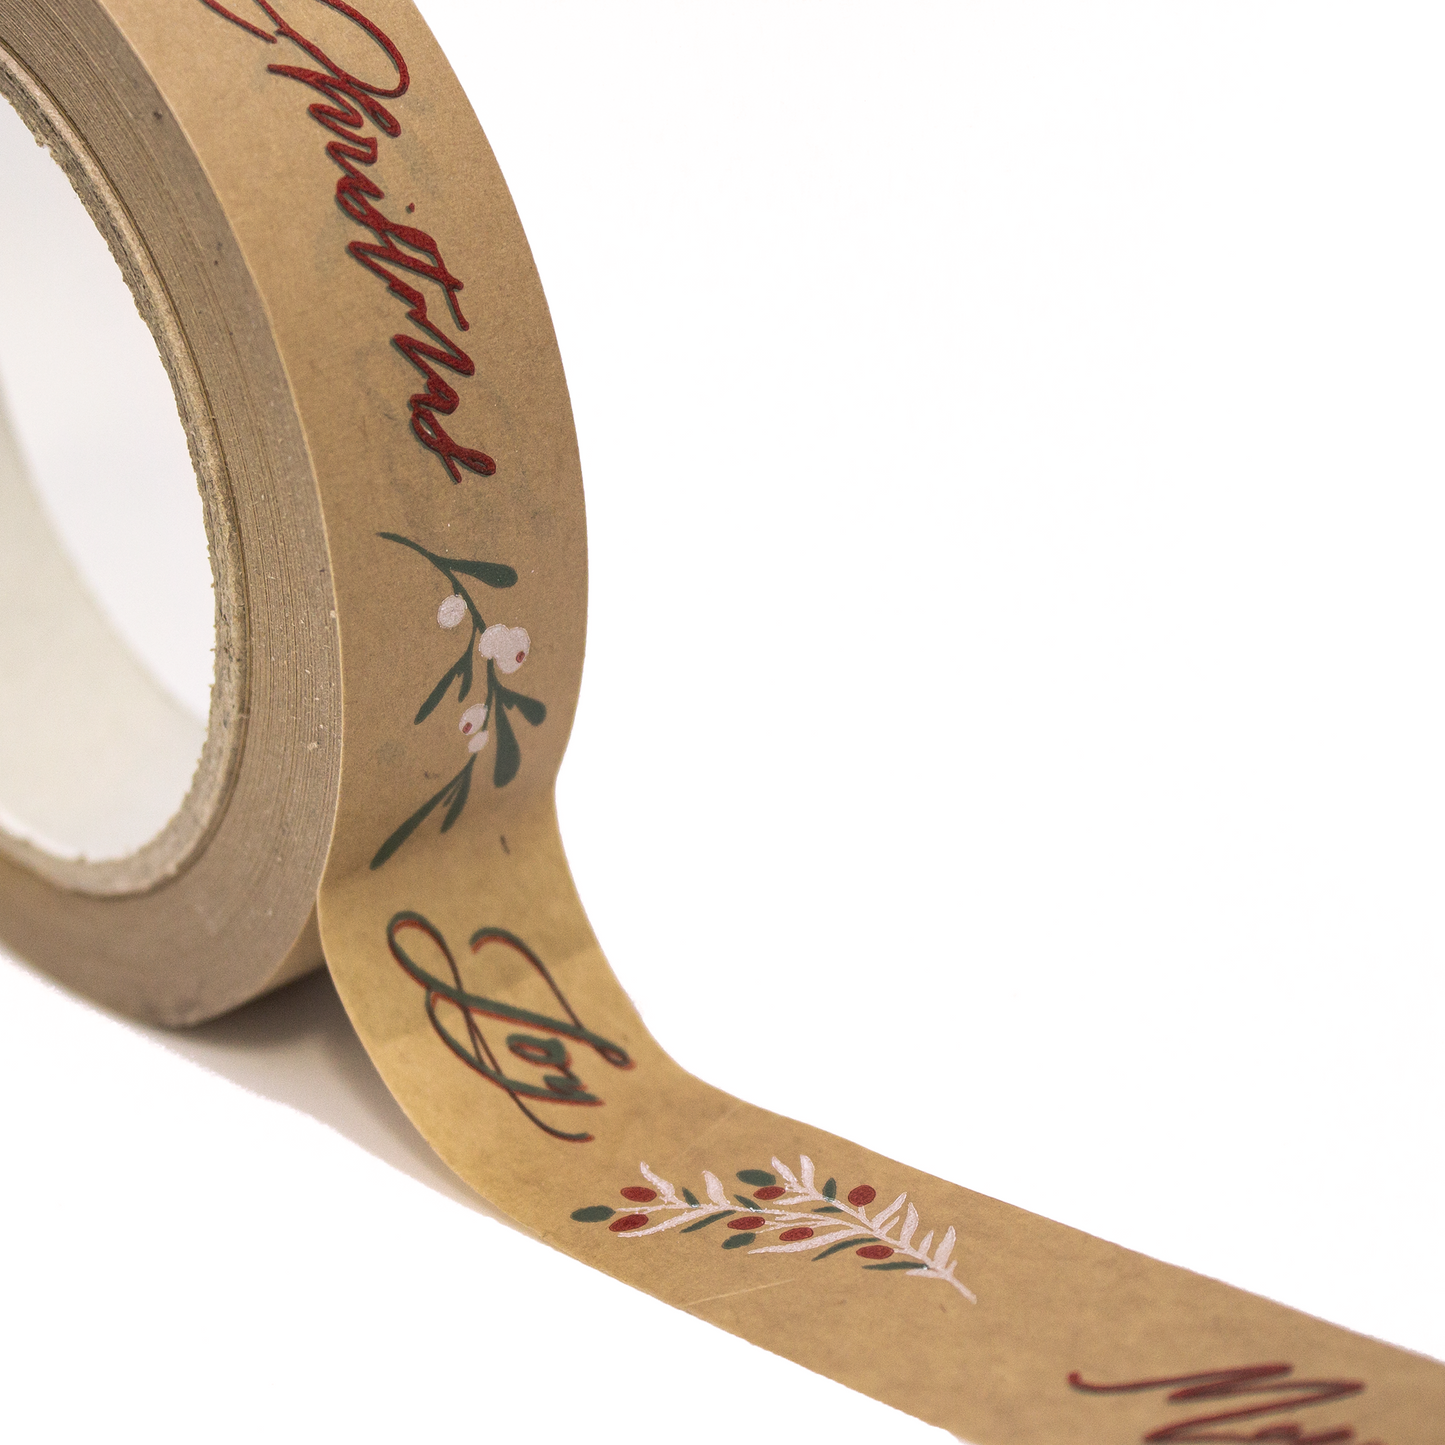 Recyclable Christmas Wrapping Tape